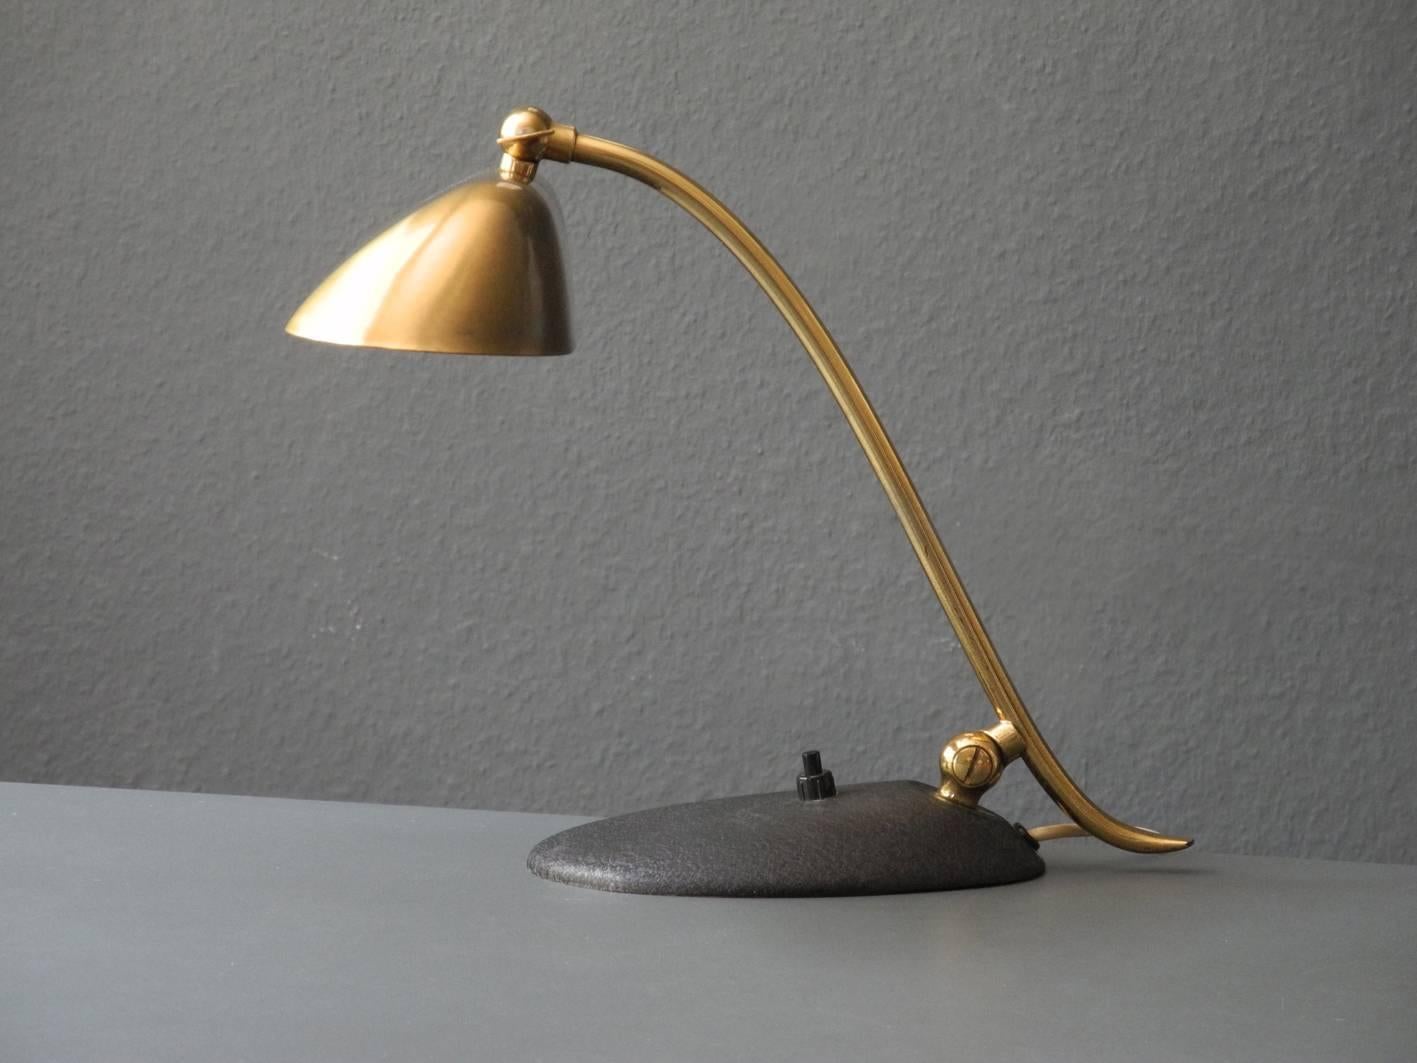 Exceptional 1960s Kaiser heavy brass desk lamp with metal base in black shrink lacquer. Also ideal as a reading and bedside lamp.
Shade and neck stepless adjustable.
Great minimalistic design with many details and very high quality.
100% original